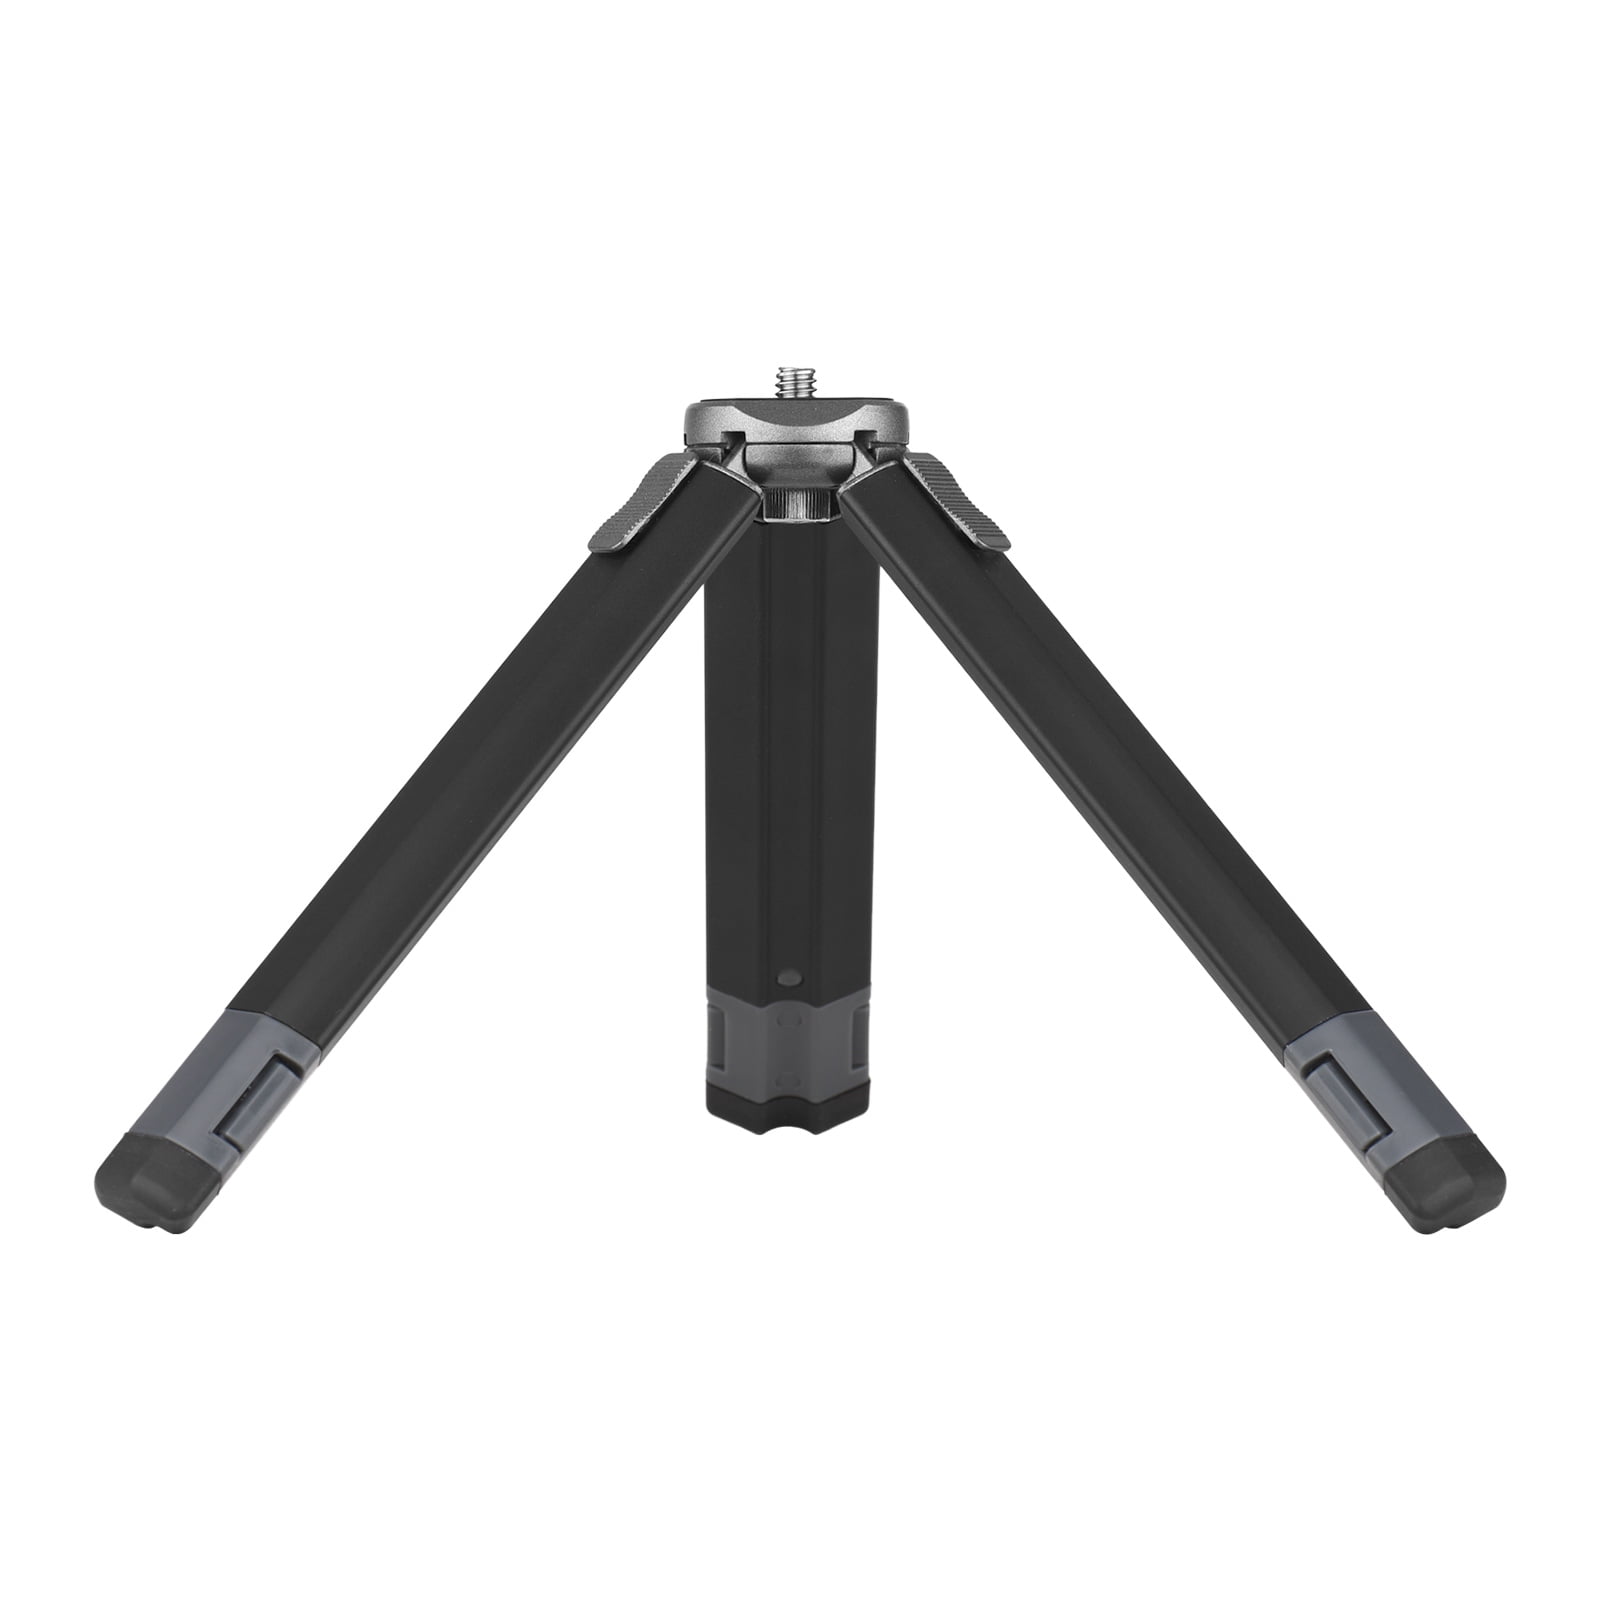 RuleaxAsi Portable Mini Tripod Stabilizer Stable Aluminium Alloy Desktop Tabletop Three-Leg Stand Holder Support Base with 1/4 Inch Screw for GoPro Cameras DSLR Camcorder for Stabilizers of ZHIYUN 